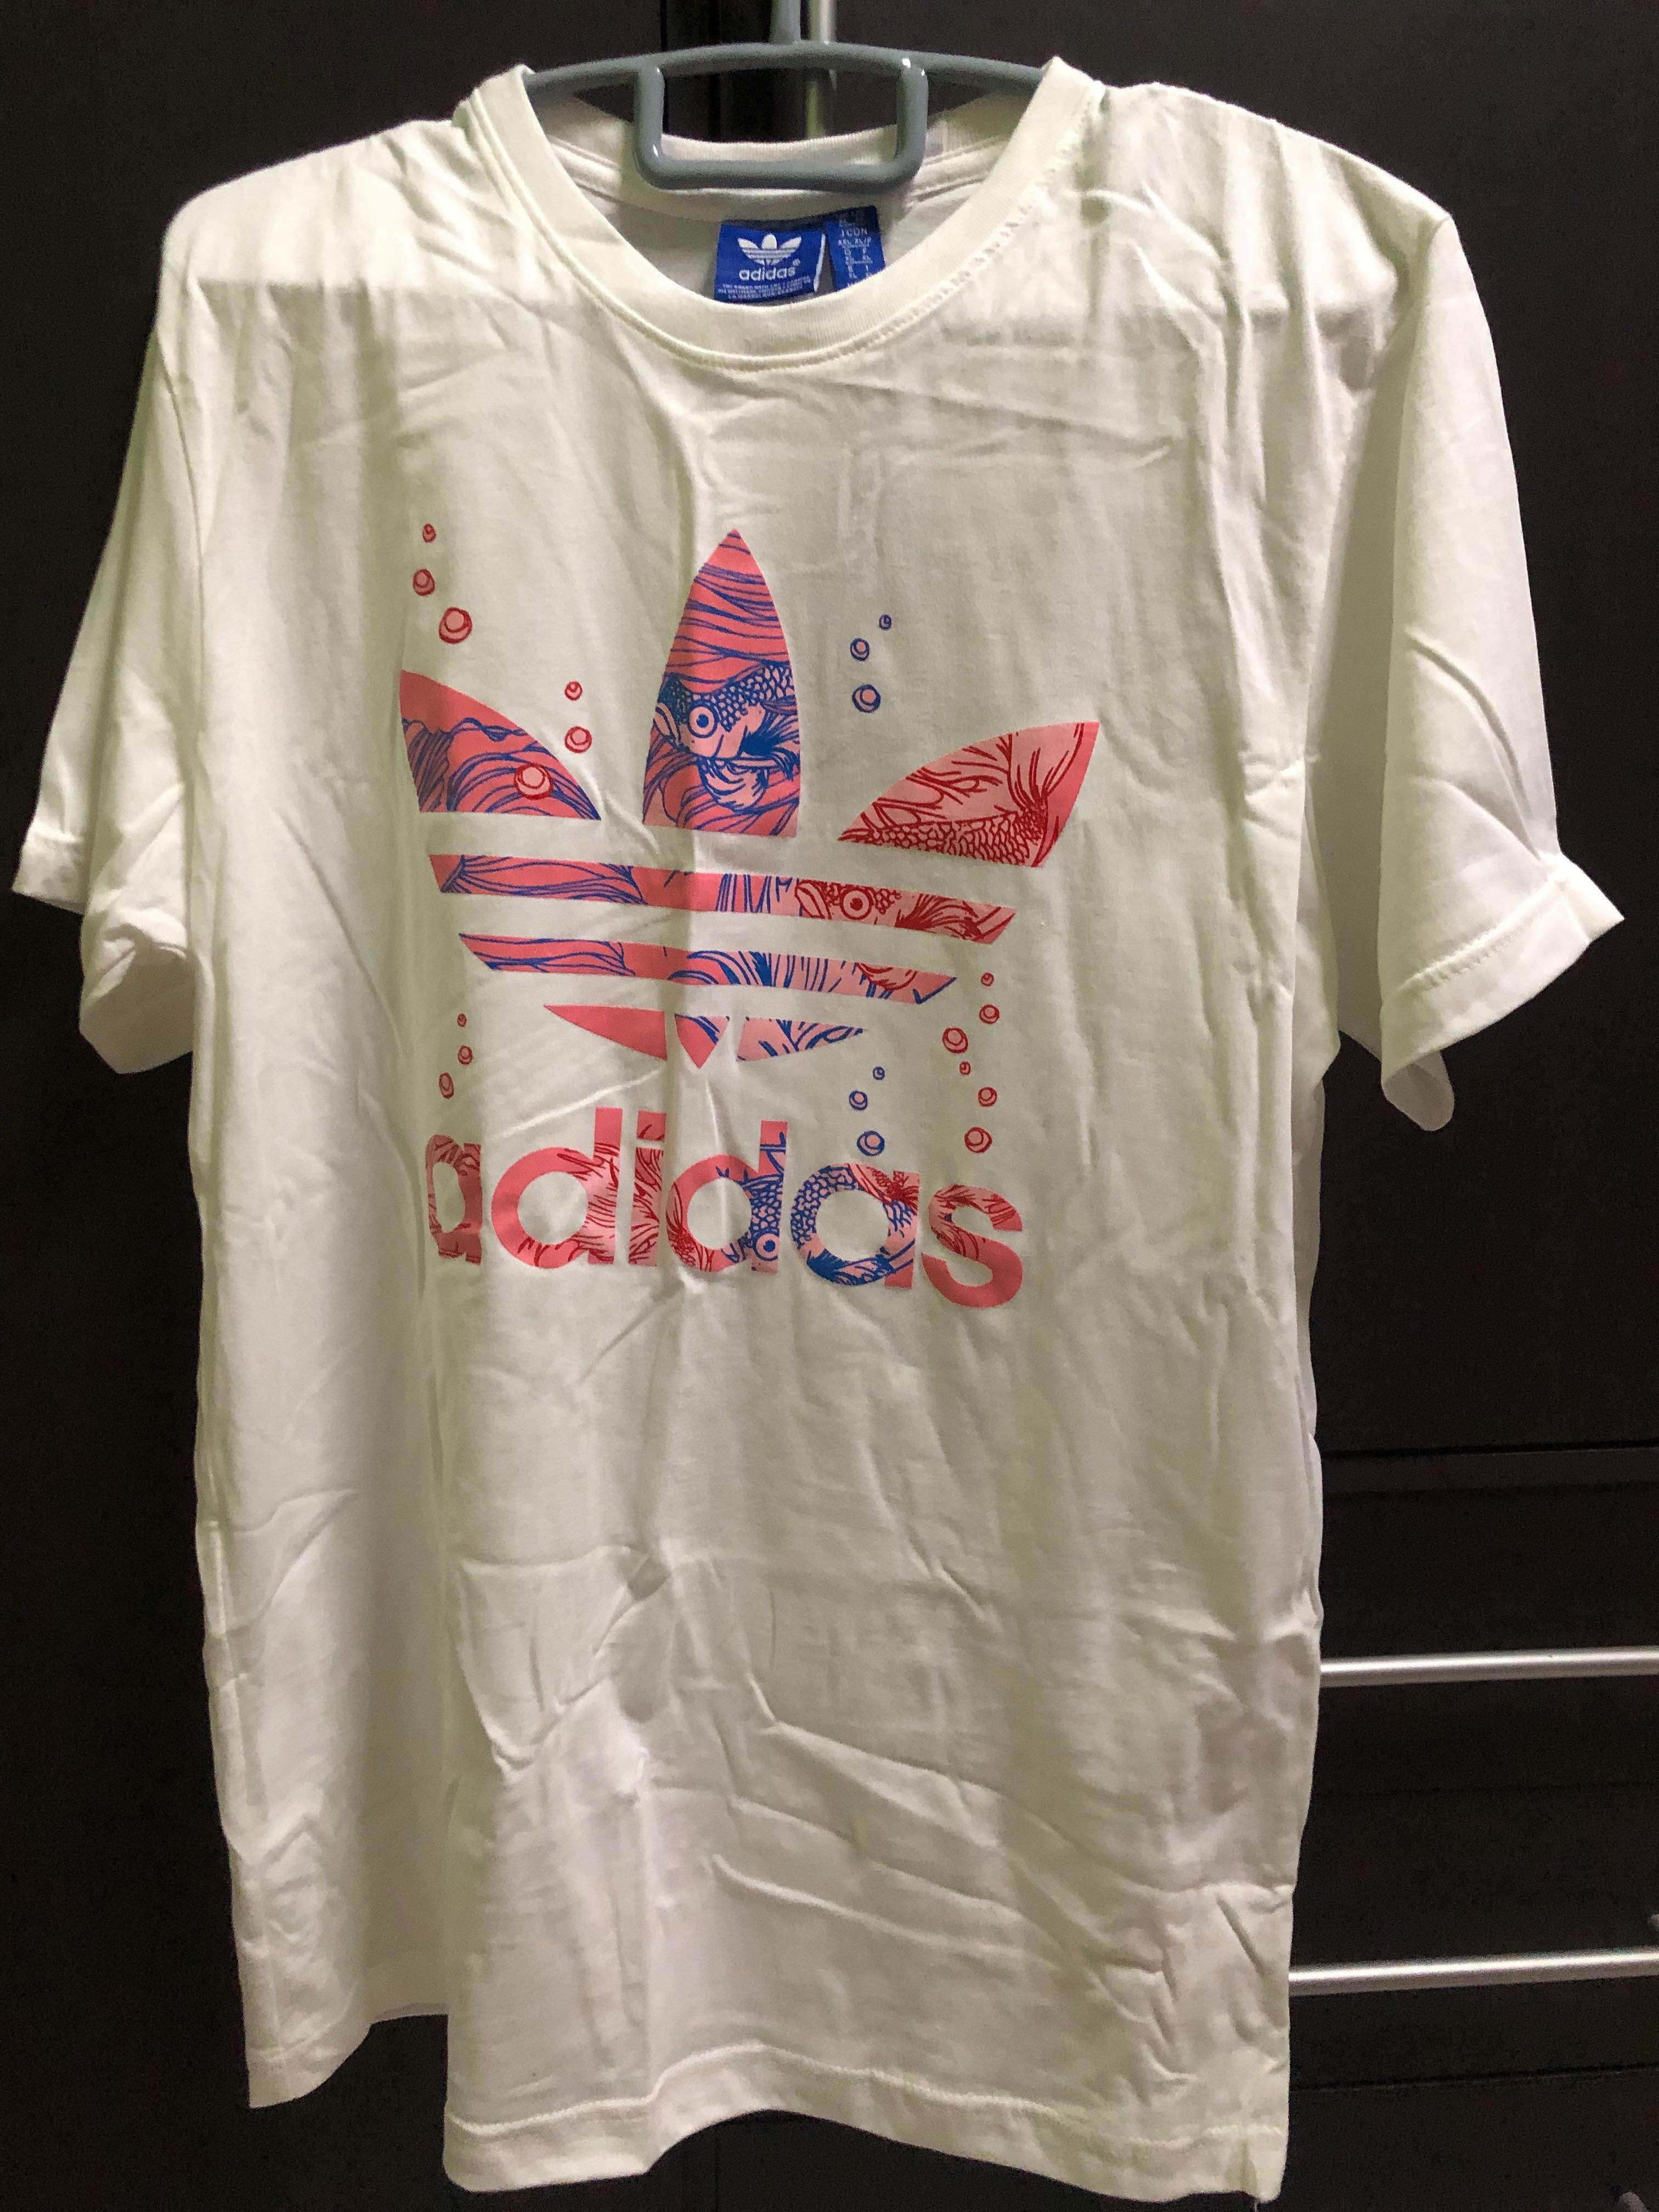 Brand New white Adidas Tshirt with pink 